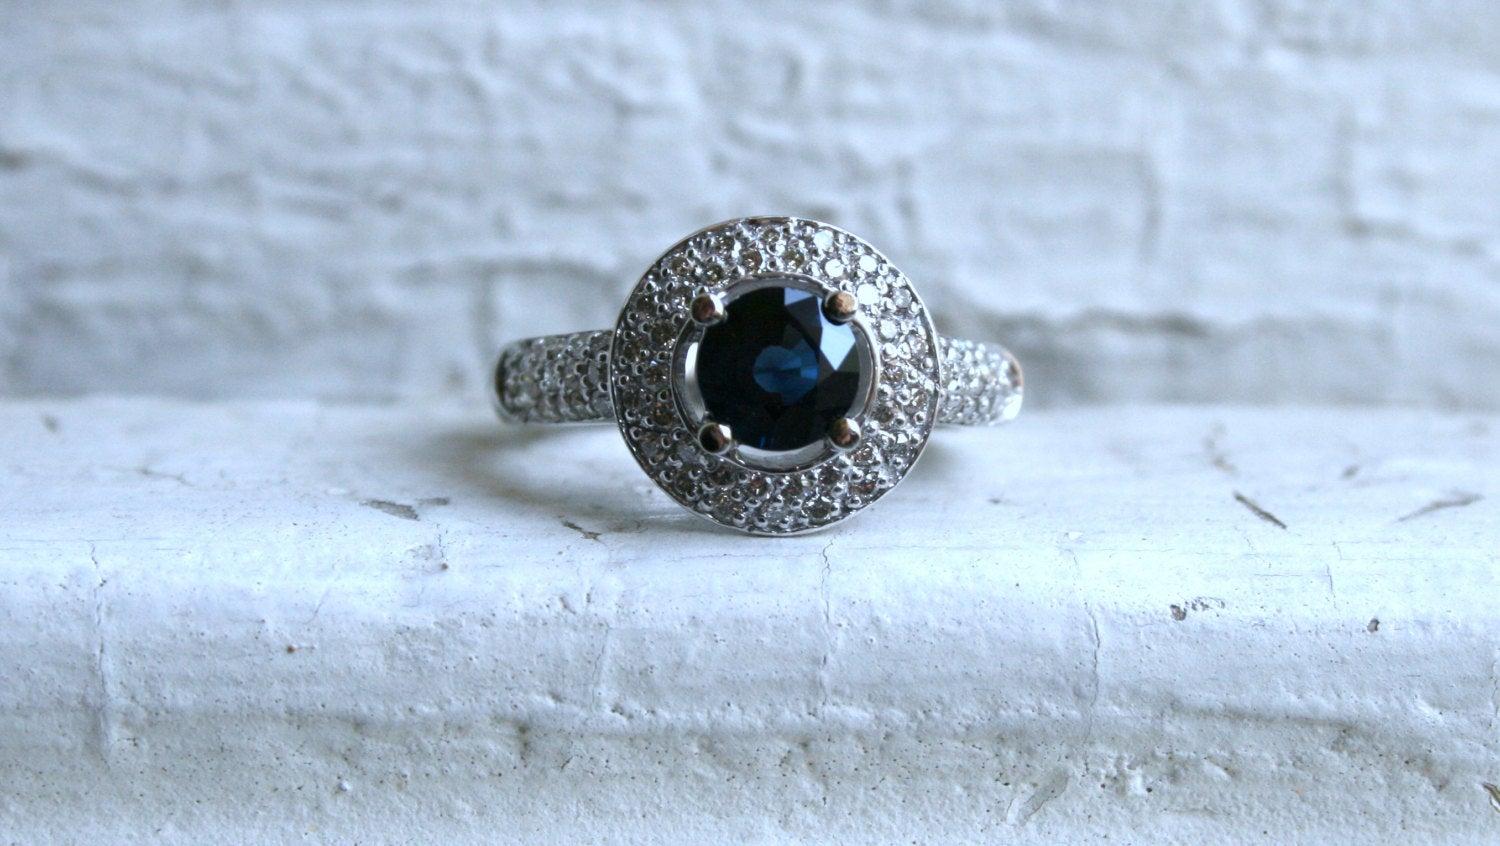 This Beautiful Vintage Pave Diamond and Sapphire Halo Ring is so stunning I'm temped to keep it for myself. Crafted in 14K White Gold, the design is a classic Halo, with a gorgeous central Sapphire, a double row of Pave Set Diamonds surrounding, and